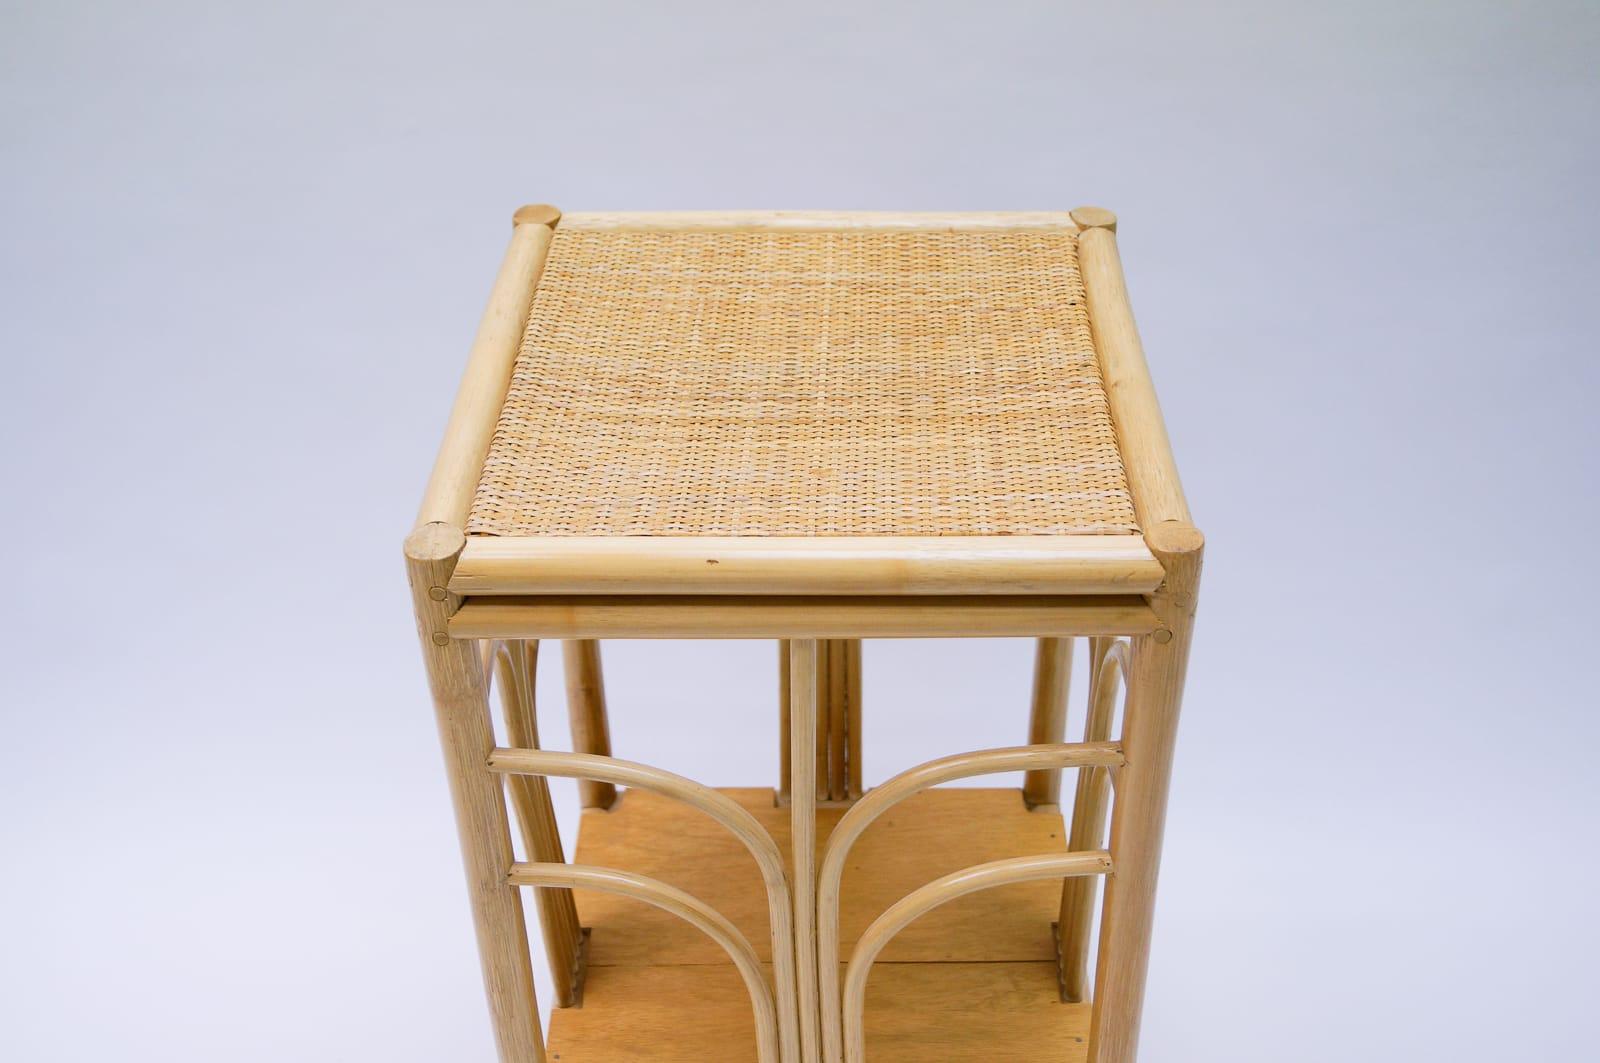 Elegant Mid-Century Modern Italian Bamboo and Rattan Flower Stand For Sale 1